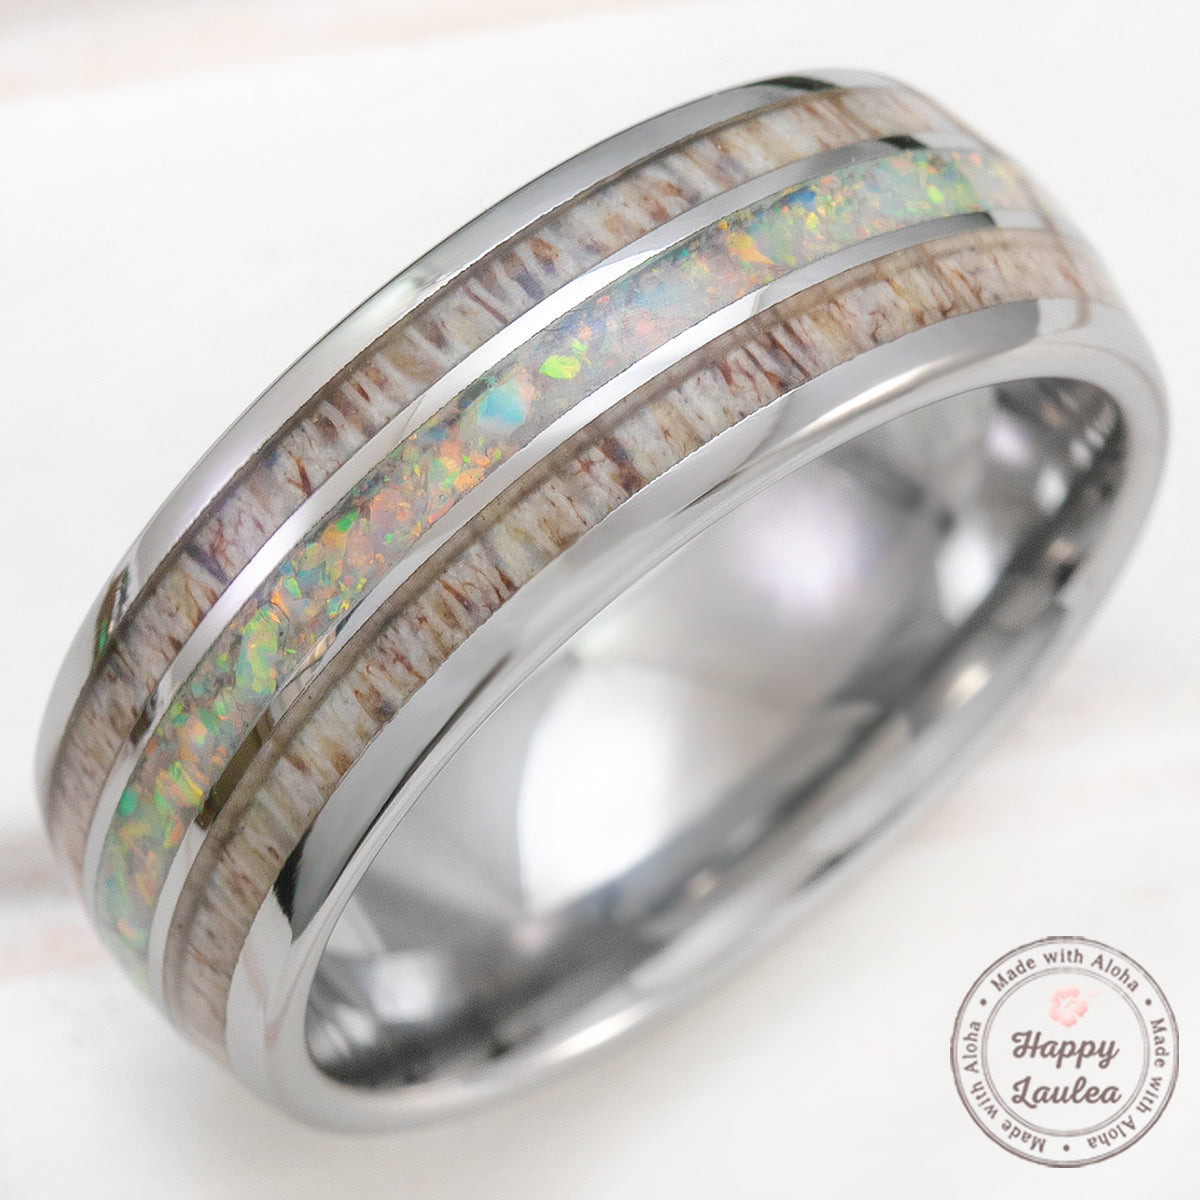 Tungsten Carbide 8mm Ring with White Opal & Antler Tri-Inlay - Dome Shape, Comfort Fitment